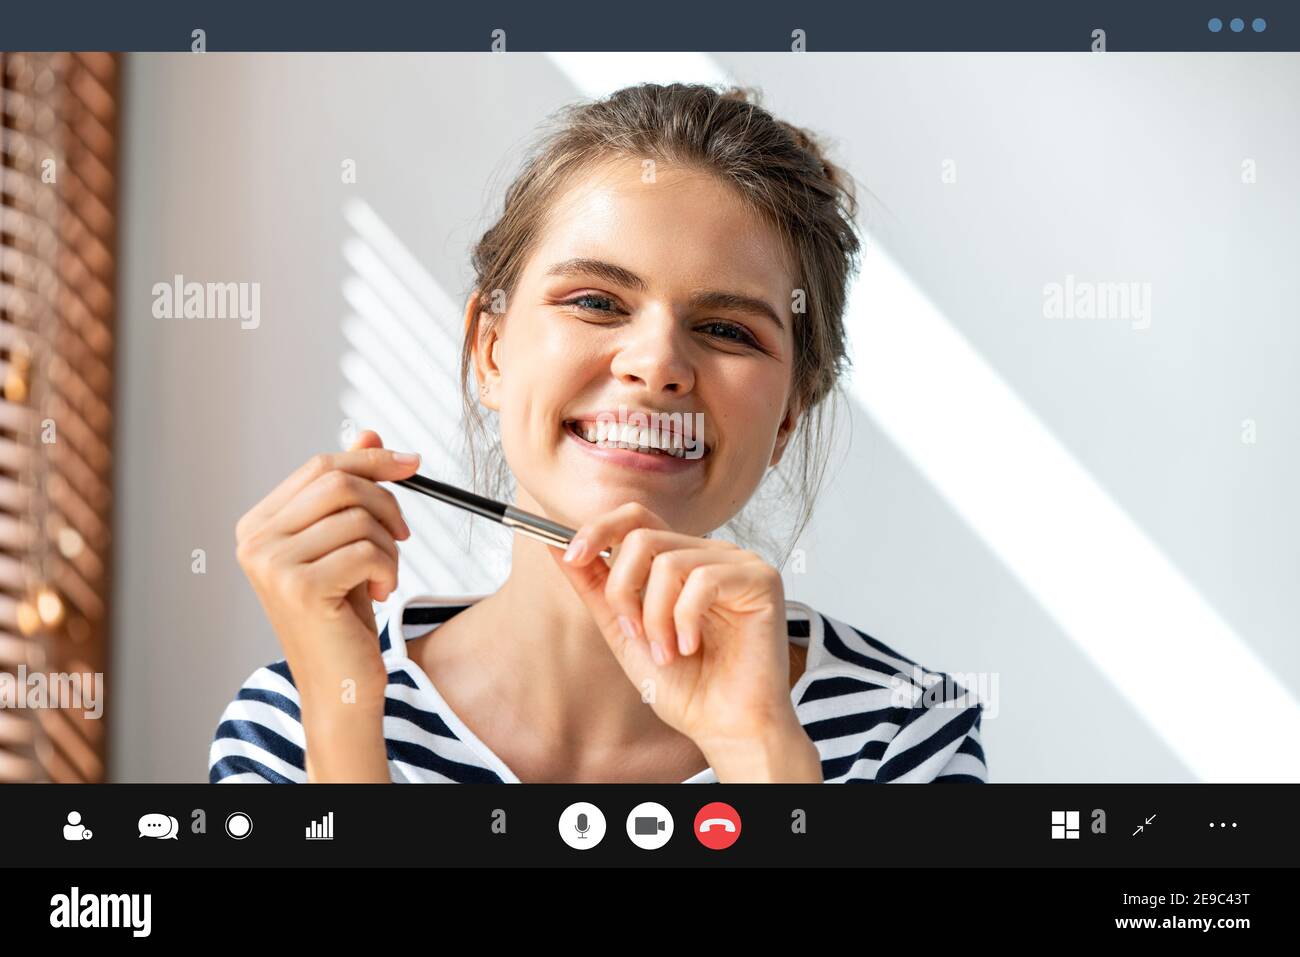 Smiling Caucasian woman holding a pen and looking at camera while making video conference call in living room, learning and working from home concept Stock Photo